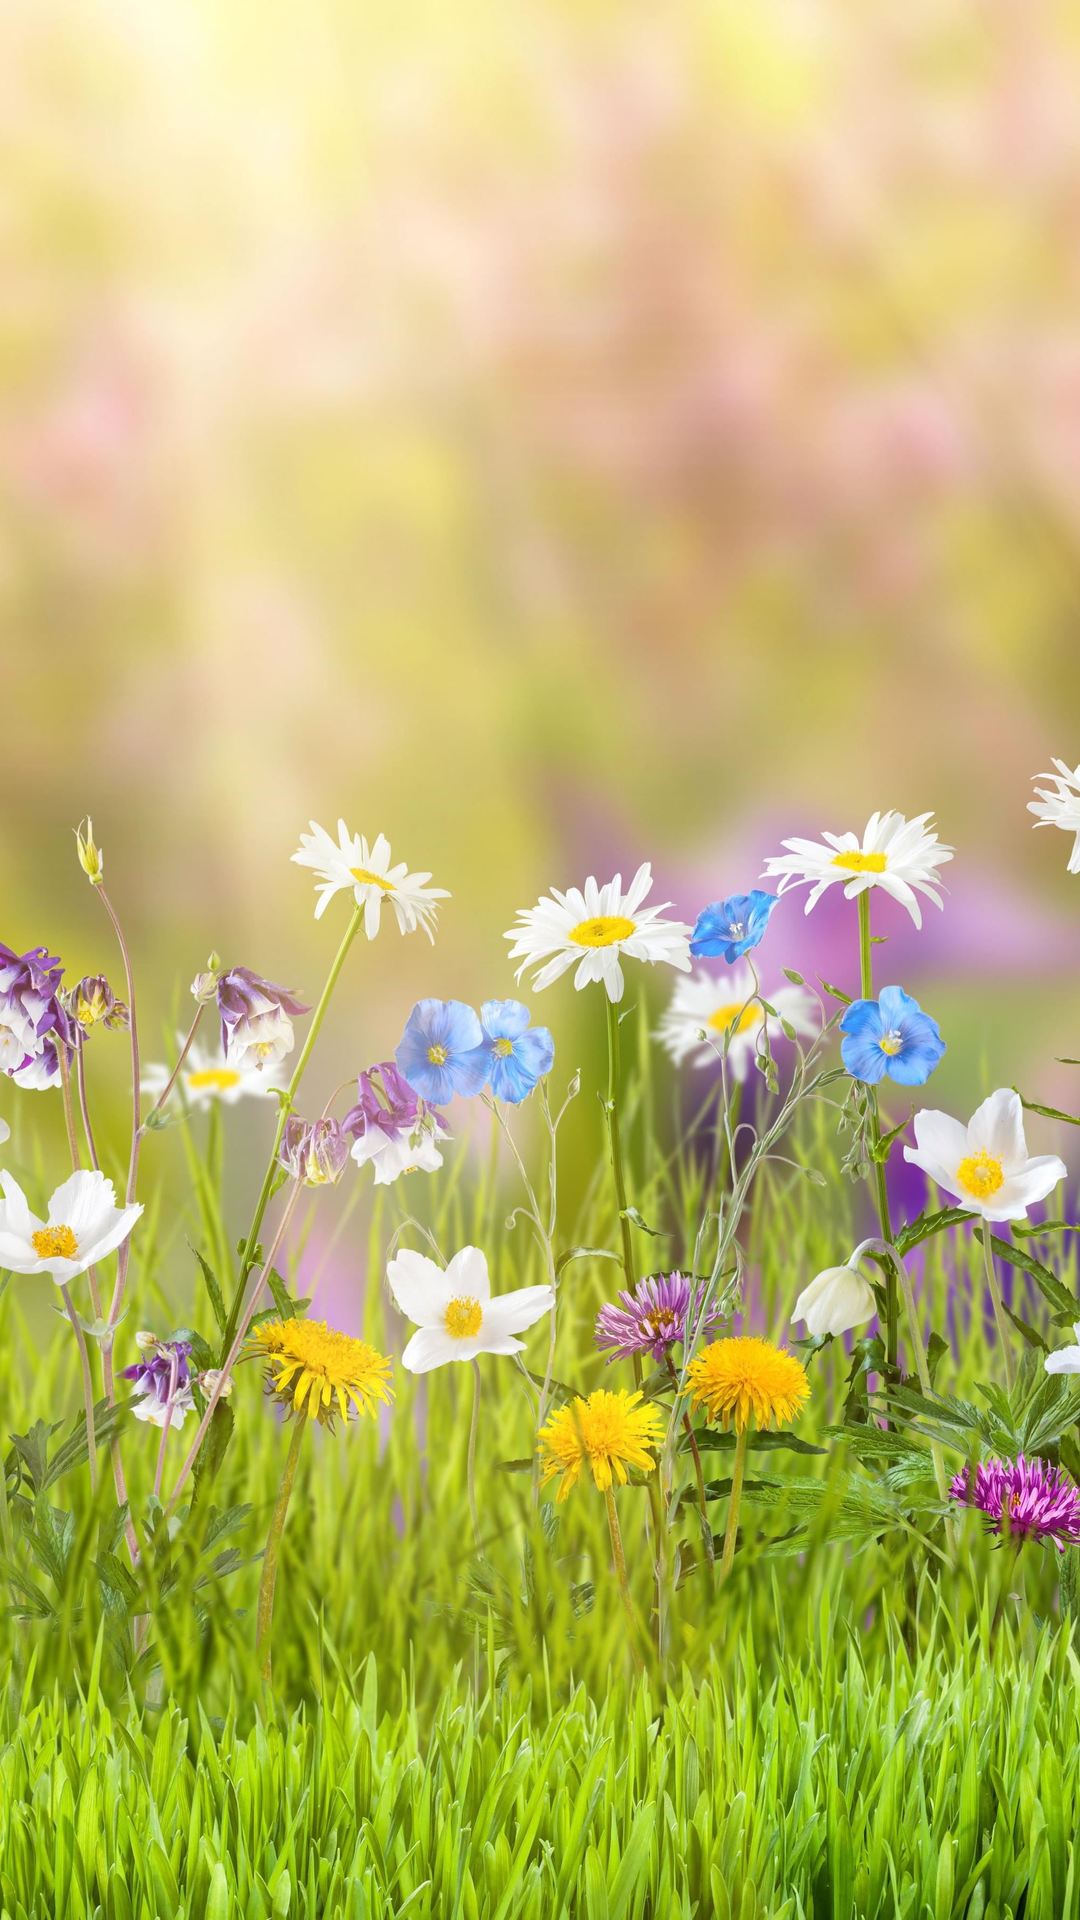 Spring iPhone Wallpaper, Amazing iPhone Wallpaper, Field Facebook Cover